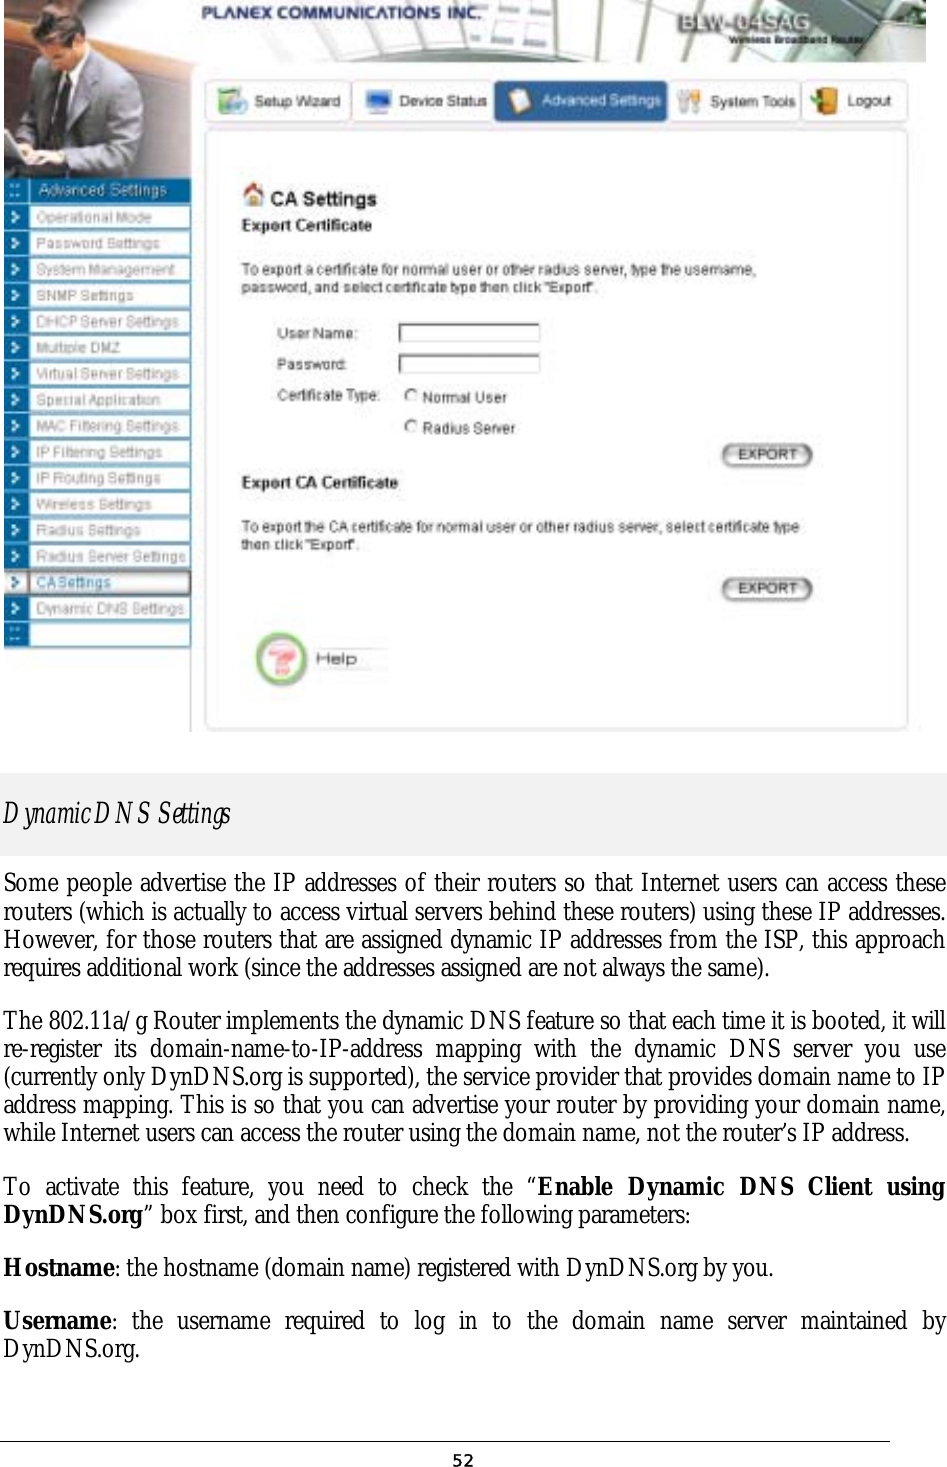               Dynamic DNS Settings Some people advertise the IP addresses of their routers so that Internet users can access these routers (which is actually to access virtual servers behind these routers) using these IP addresses. However, for those routers that are assigned dynamic IP addresses from the ISP, this approach requires additional work (since the addresses assigned are not always the same). The 802.11a/g Router implements the dynamic DNS feature so that each time it is booted, it will re-register its domain-name-to-IP-address mapping with the dynamic DNS server you use (currently only DynDNS.org is supported), the service provider that provides domain name to IP address mapping. This is so that you can advertise your router by providing your domain name, while Internet users can access the router using the domain name, not the router’s IP address. To activate this feature, you need to check the “Enable Dynamic DNS Client using DynDNS.org” box first, and then configure the following parameters: Hostname: the hostname (domain name) registered with DynDNS.org by you. Username: the username required to log in to the domain name server maintained by DynDNS.org.  52